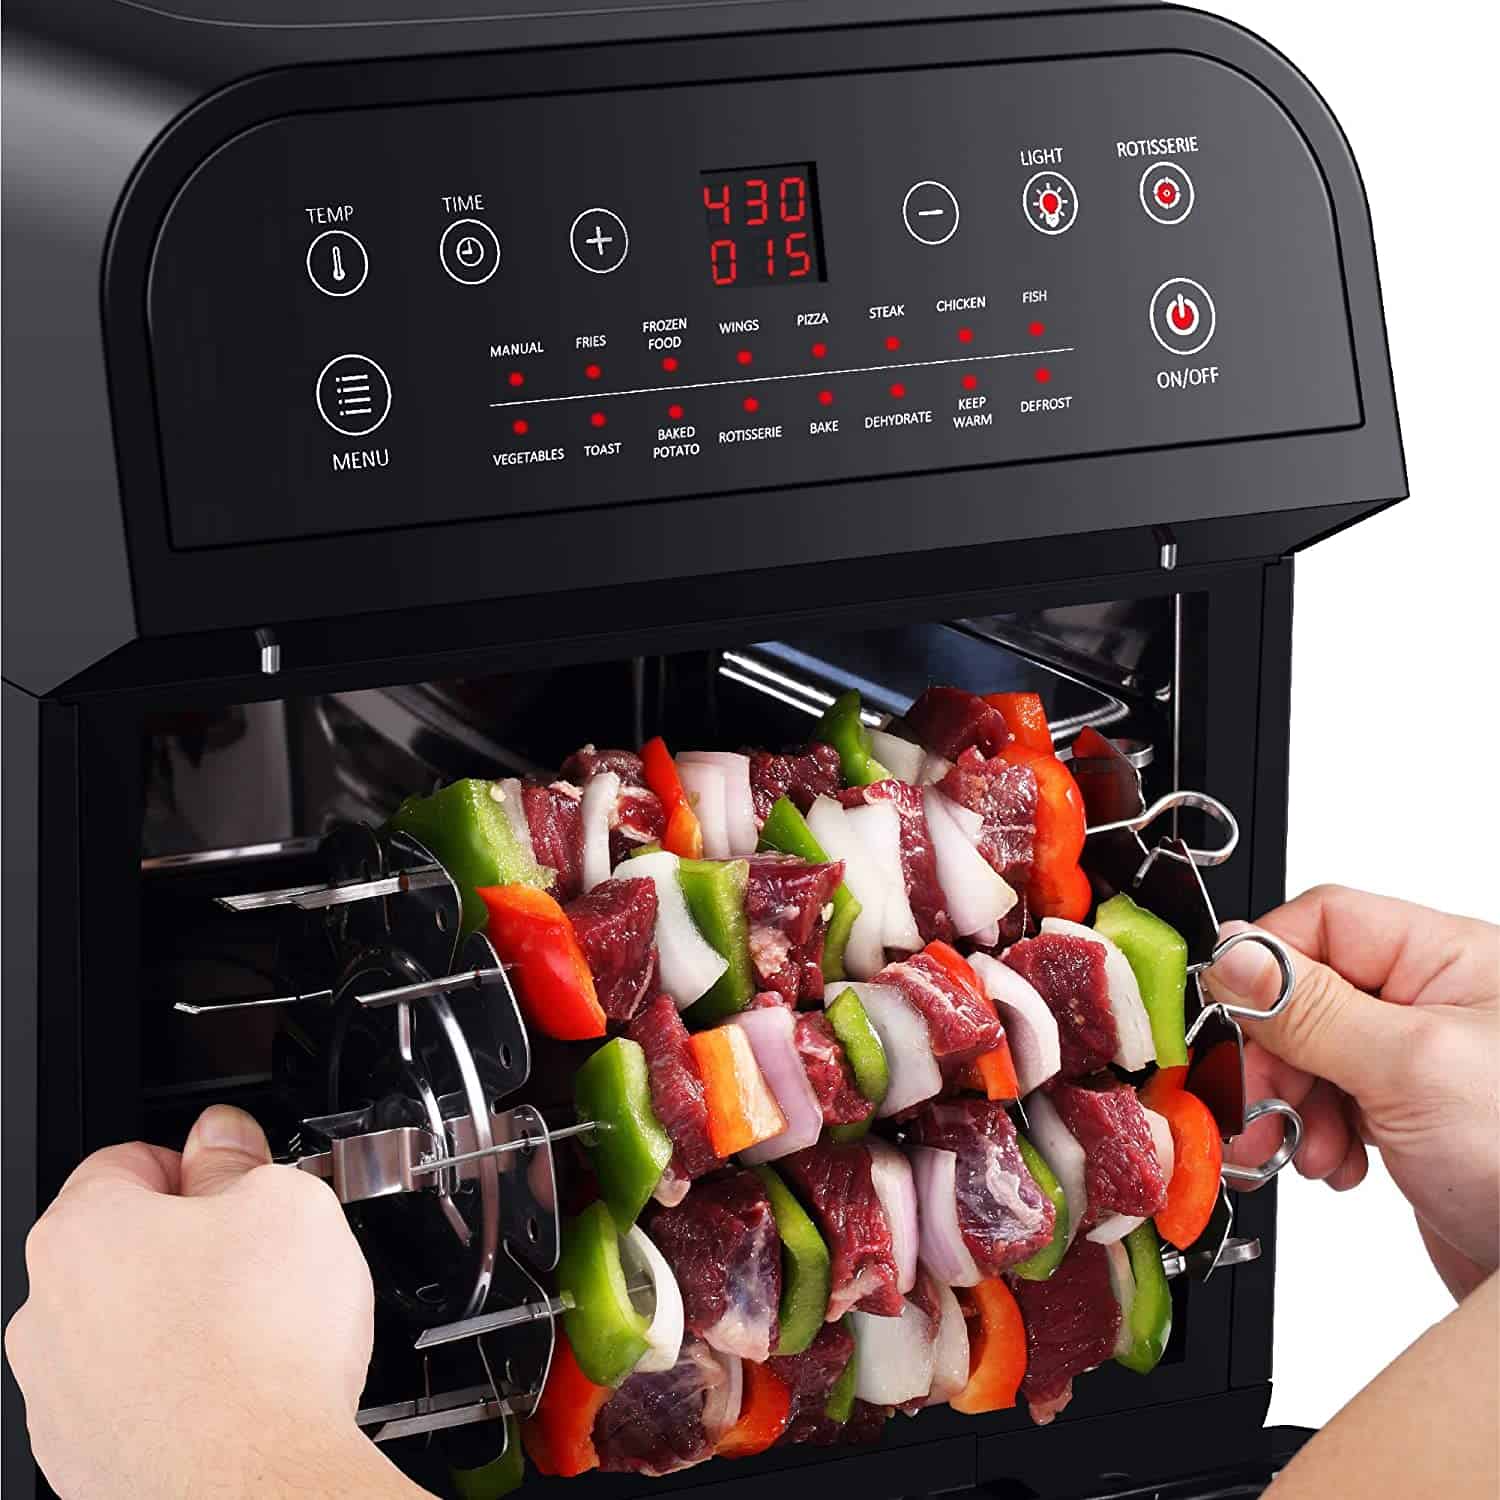 Best Rotisserie air fryer: GoWISE USA Electric Air Fryer Oven